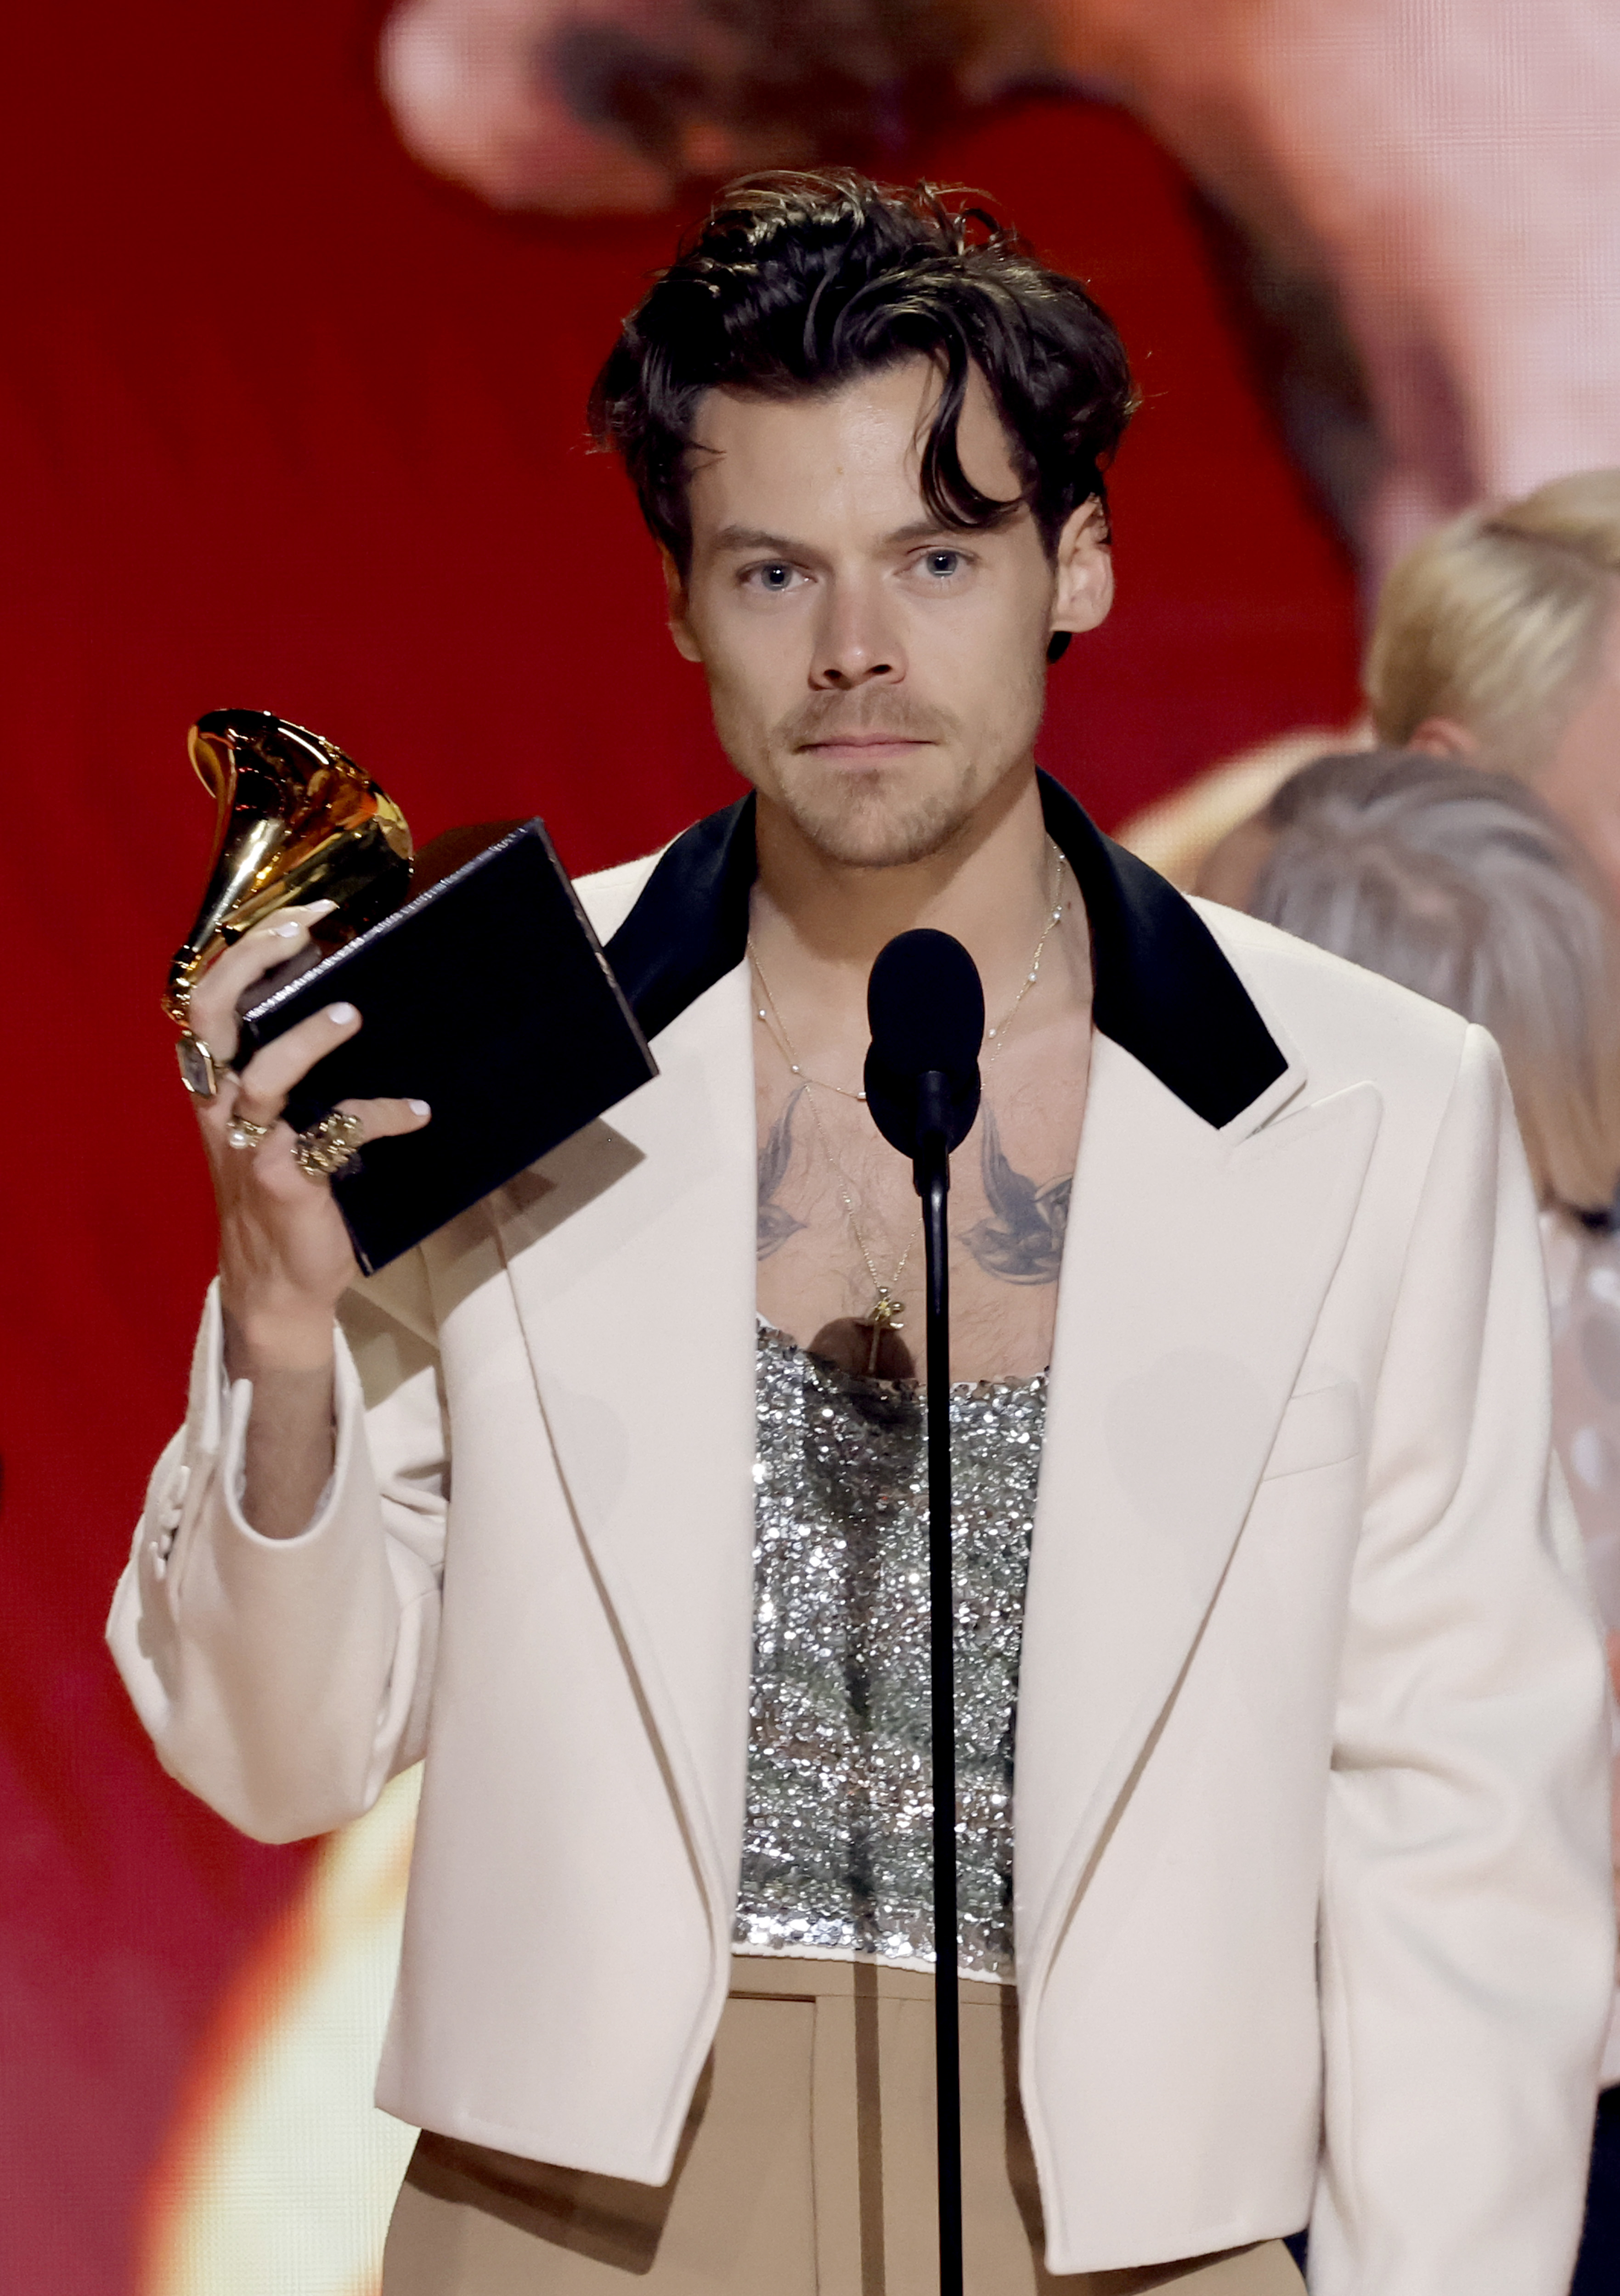 Harry Styles in a jacket and sparkly top holding a Grammy award on stage